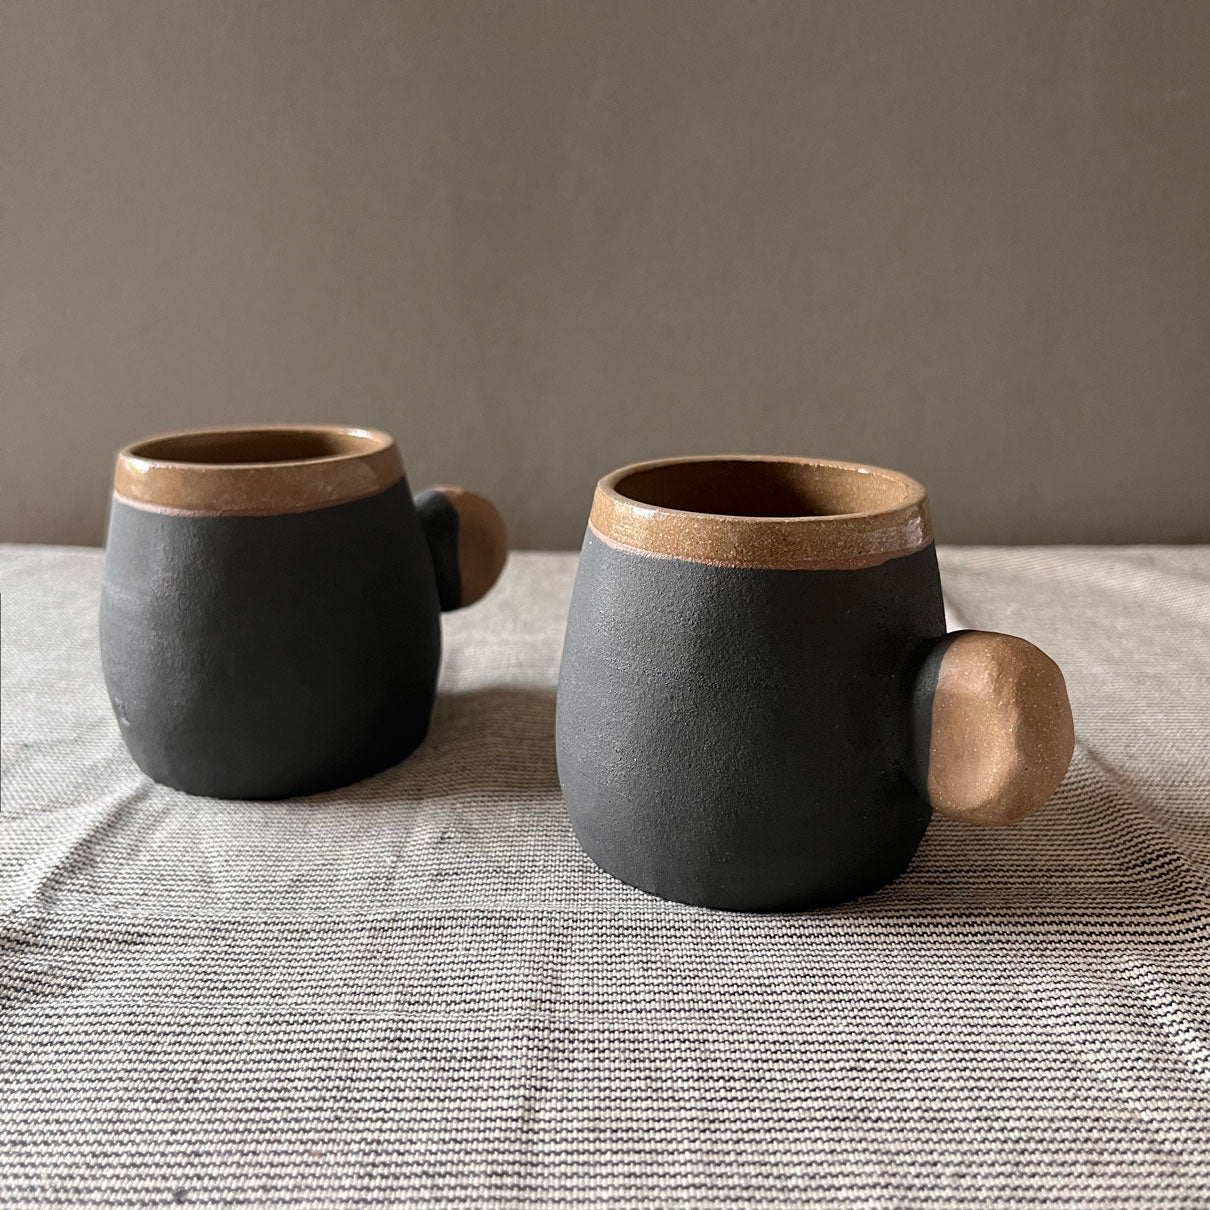 An elegant bulbous body form in brown stoneware, featuring a hammered raw texture. Black underglazed exterior that has a volcanic rock texture, with a clear glazed lip and interior. 